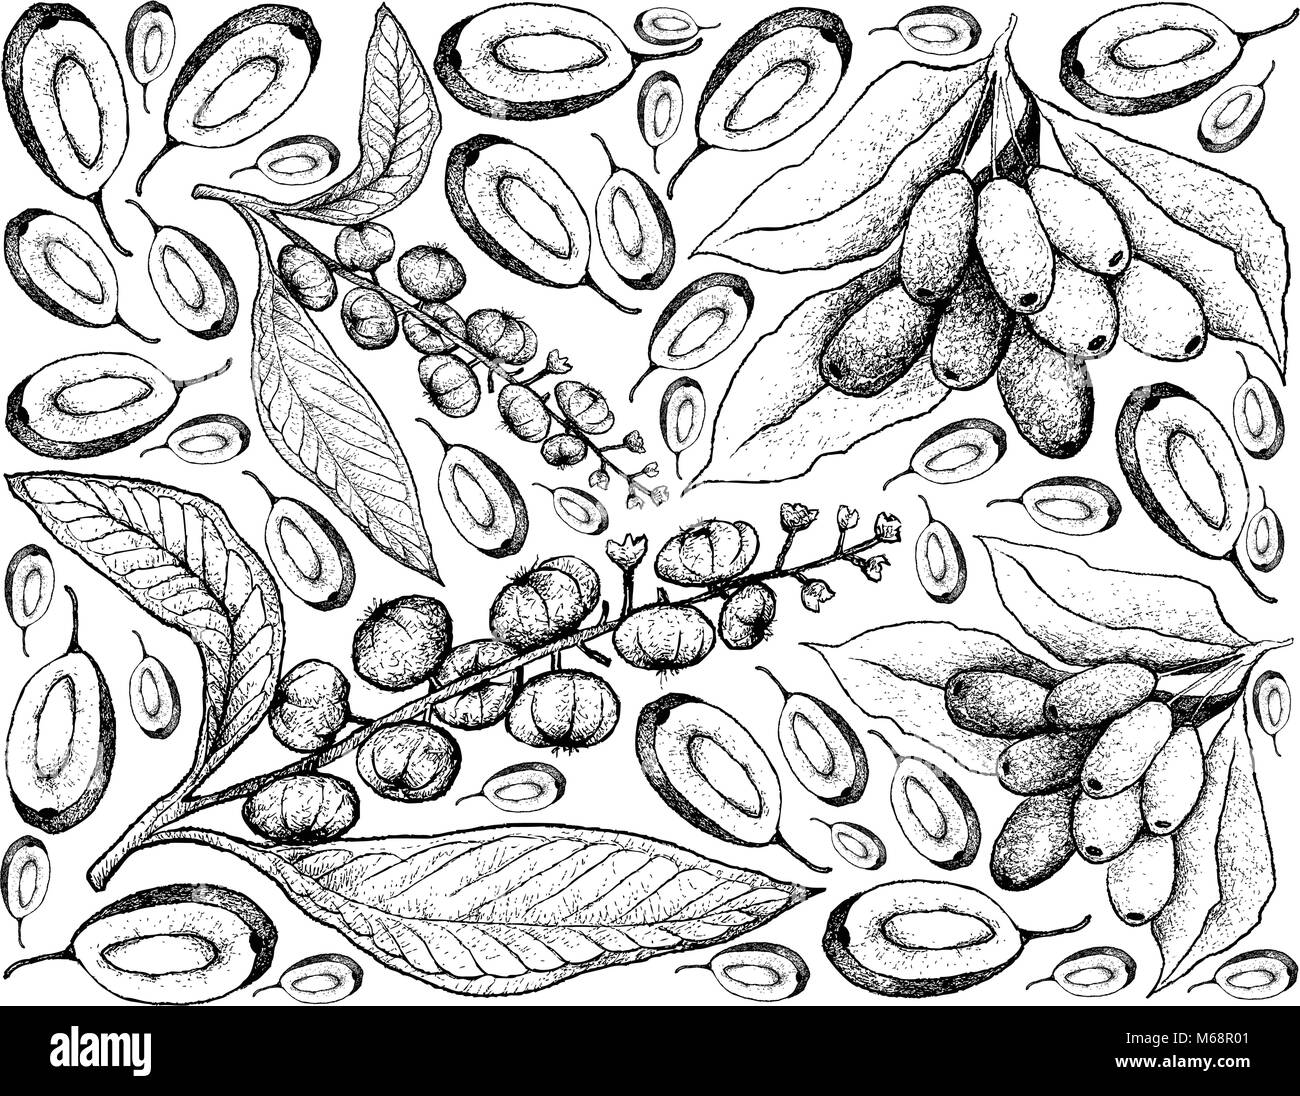 Berry Fruit, Illustration Wallpaper Background of Hand Drawn Sketch of American Pokeweed or Simply Pokeweed and Jambolan, Java Plum, Black Plum Fruits Stock Vector